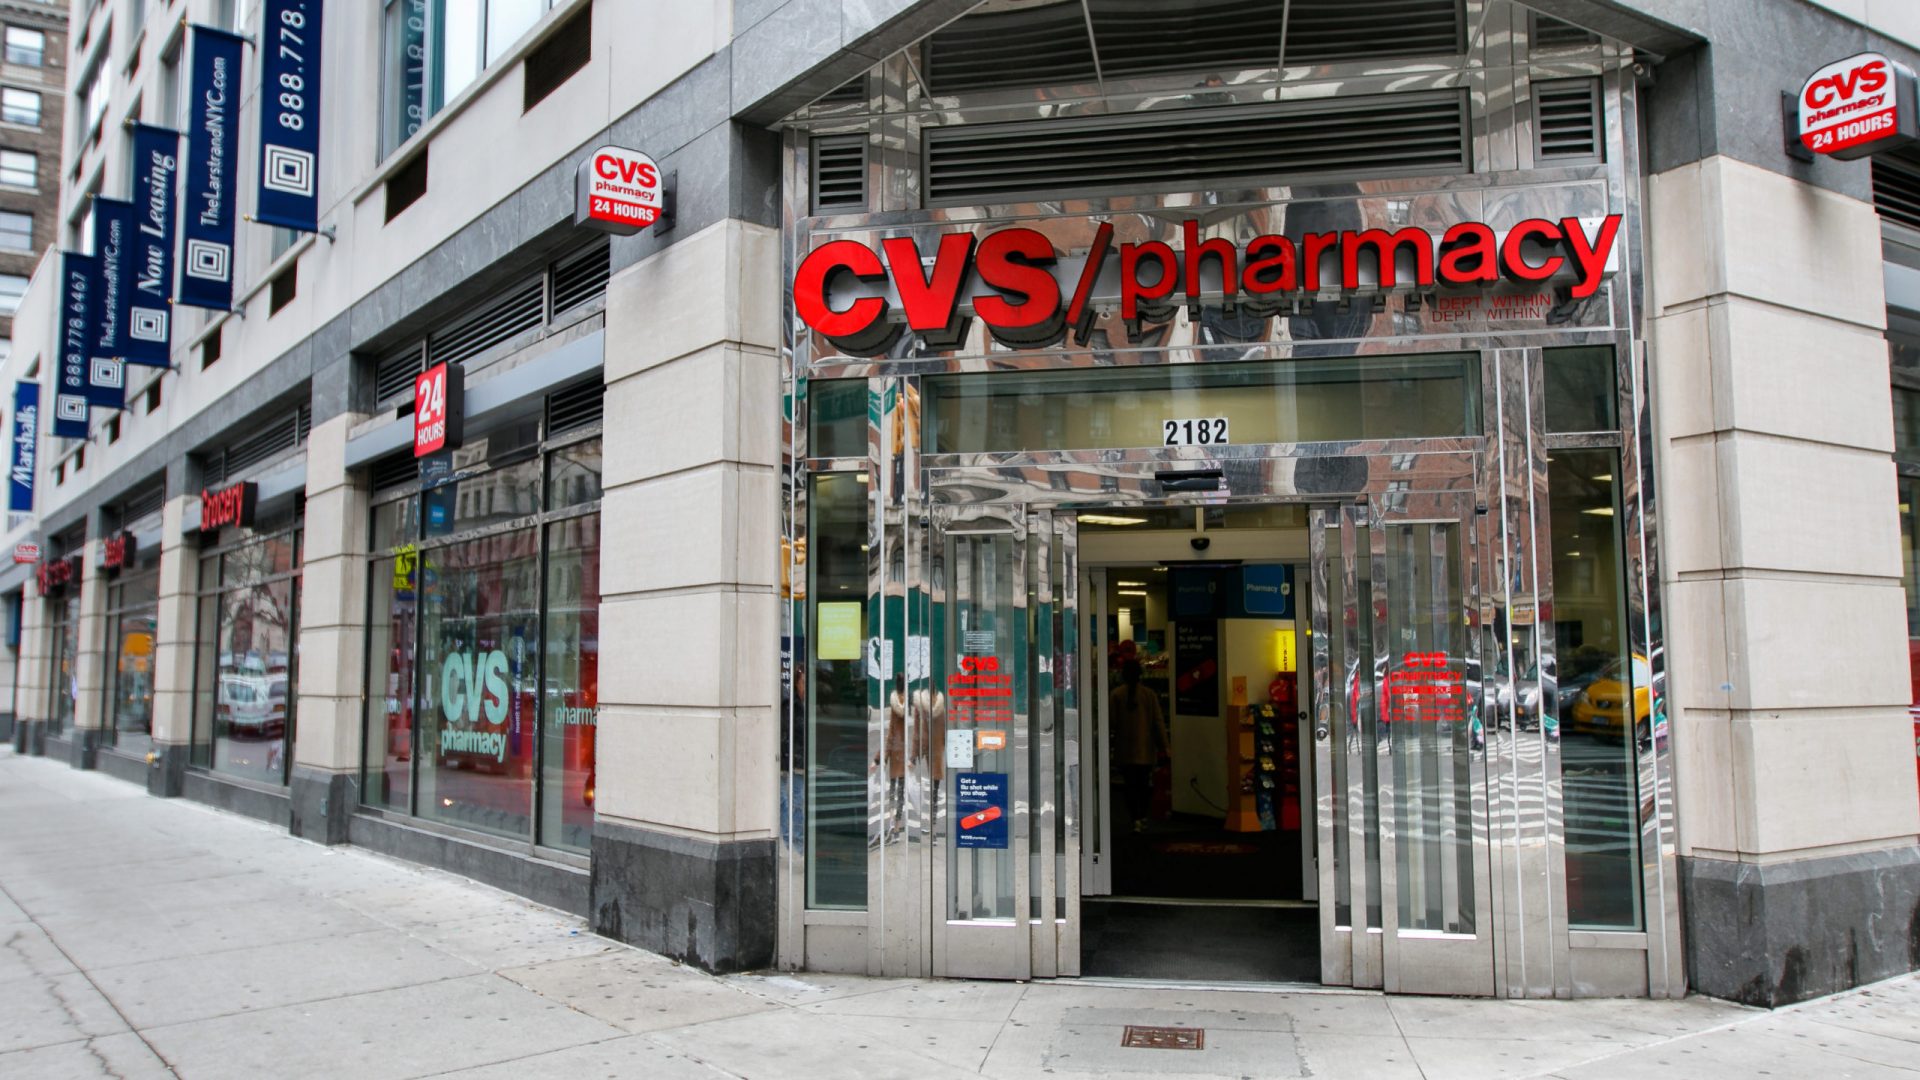 New York, January 21, 2017: Doors are open into a 24 hour CVS pharmacy on Upper West Side in Manhattan.